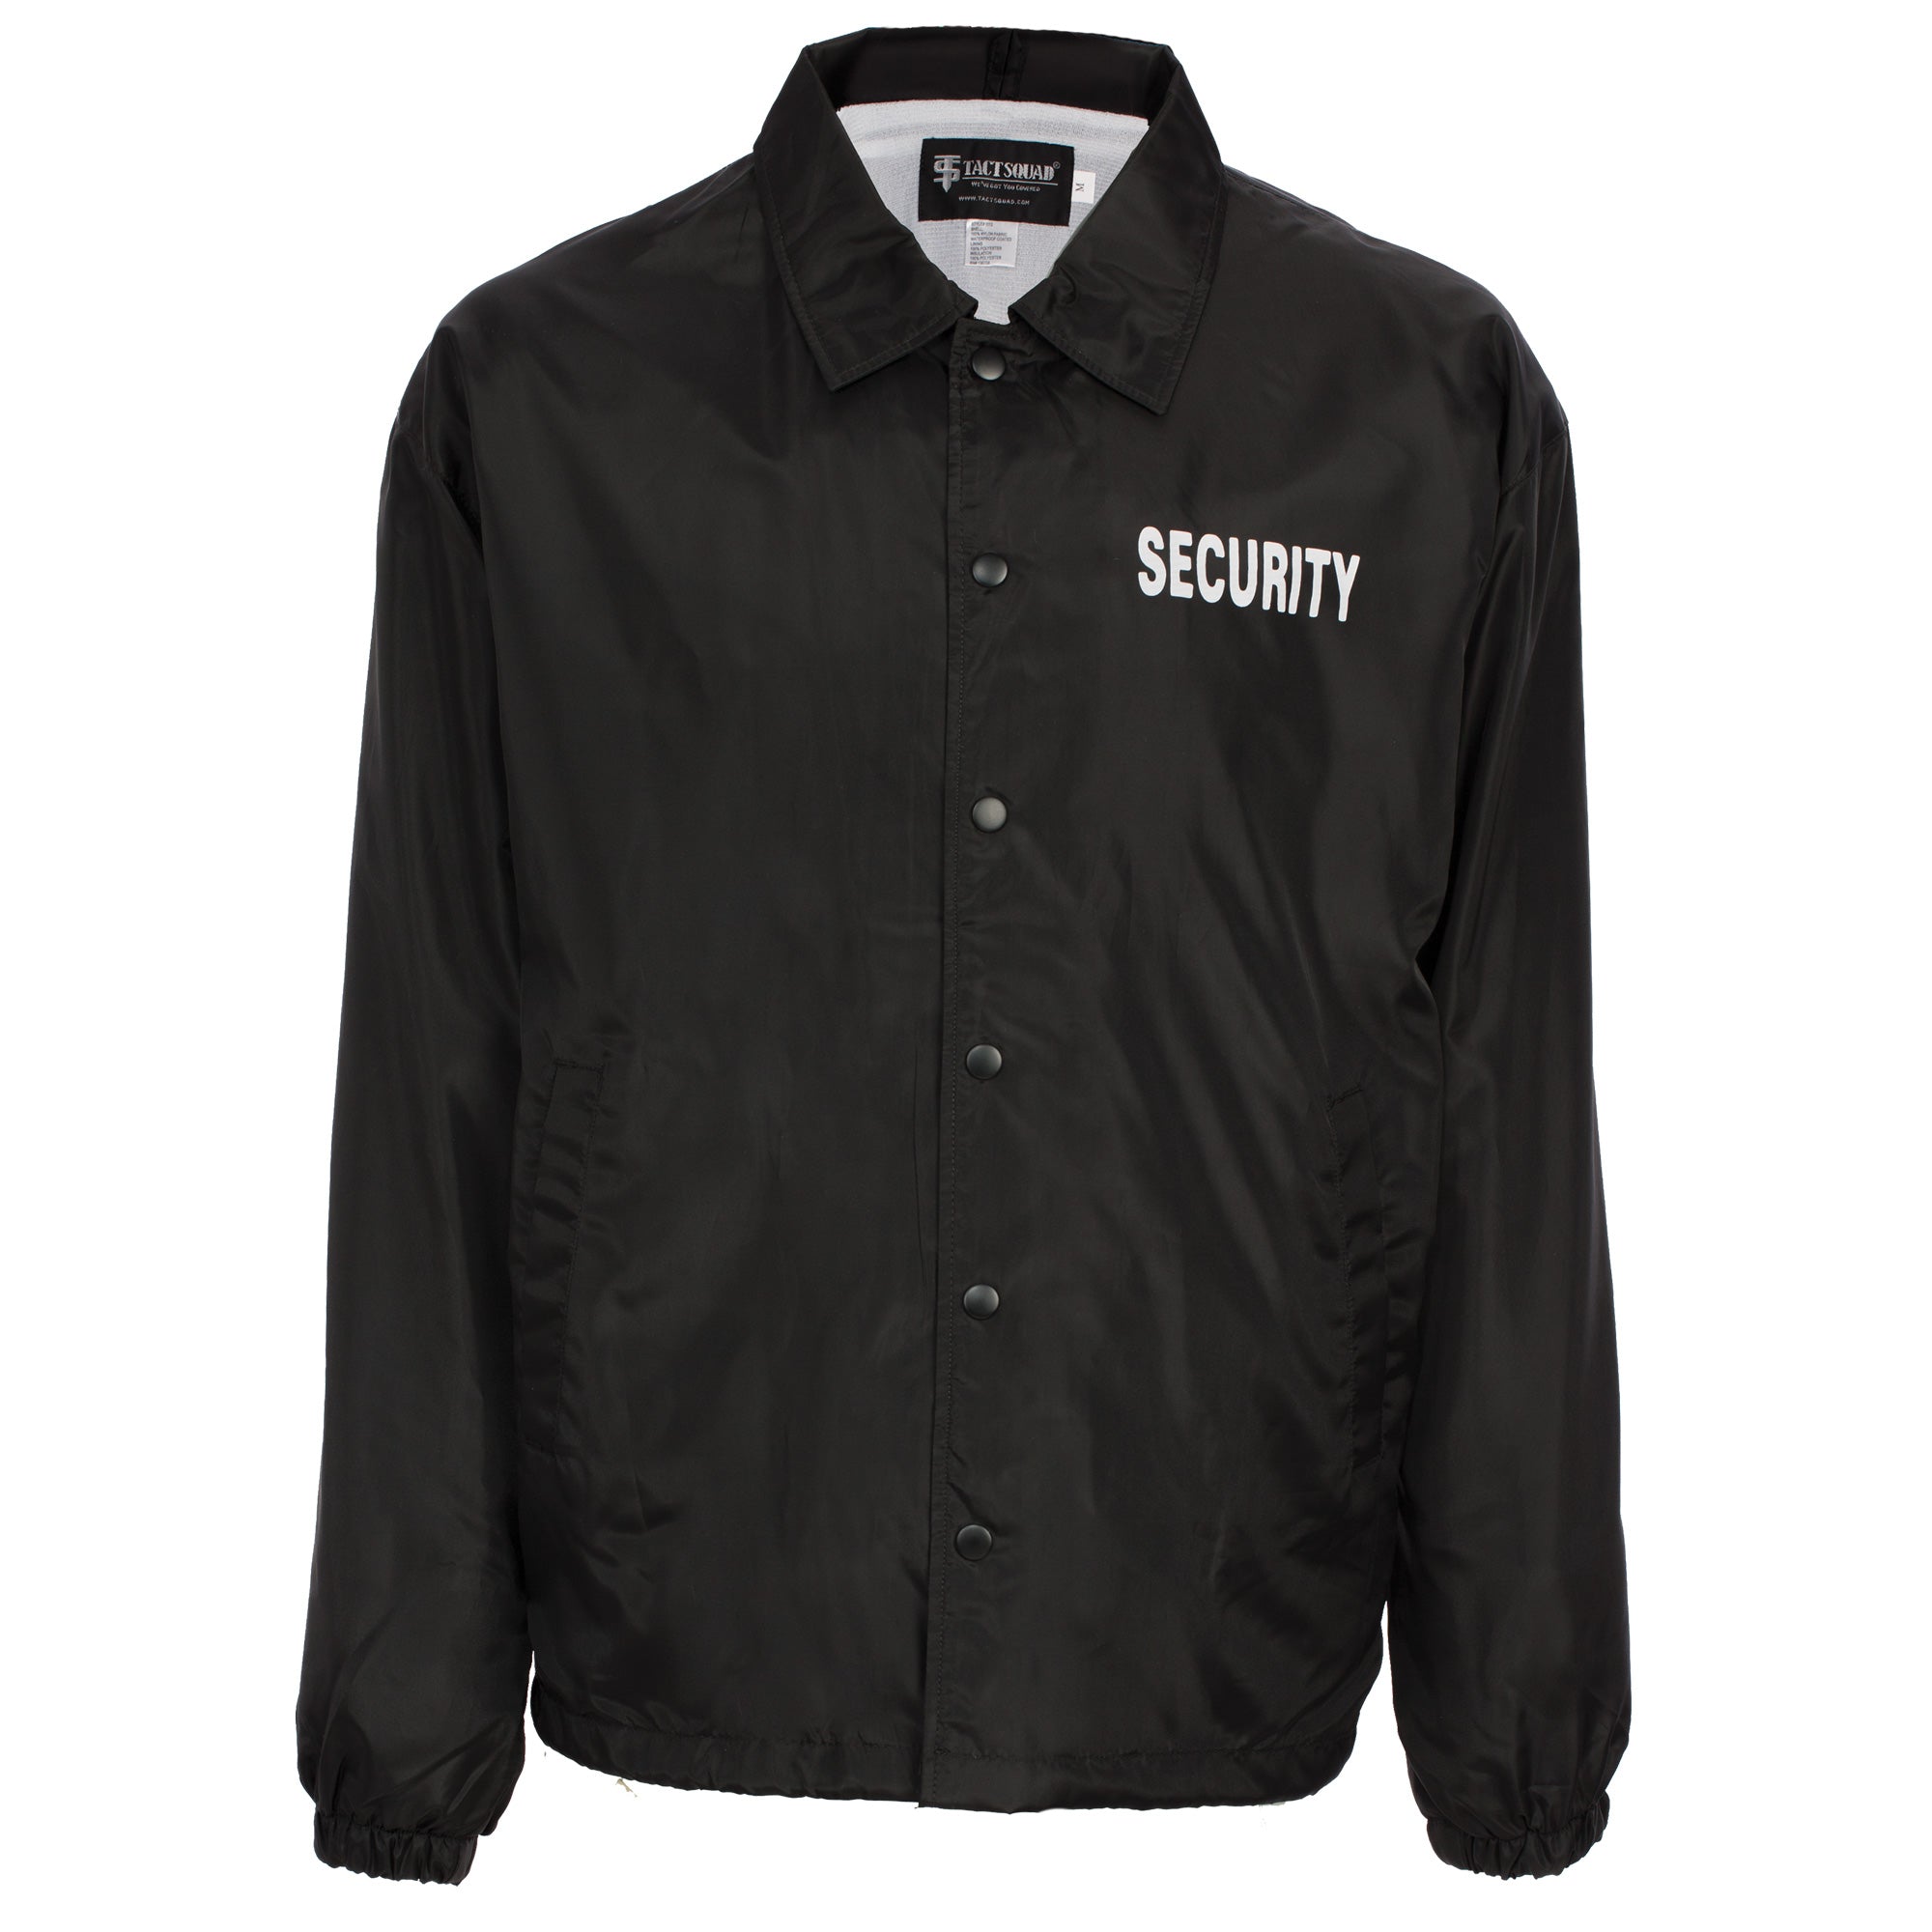 Tact Squad Classic Windbreaker SECURITY Printed black color